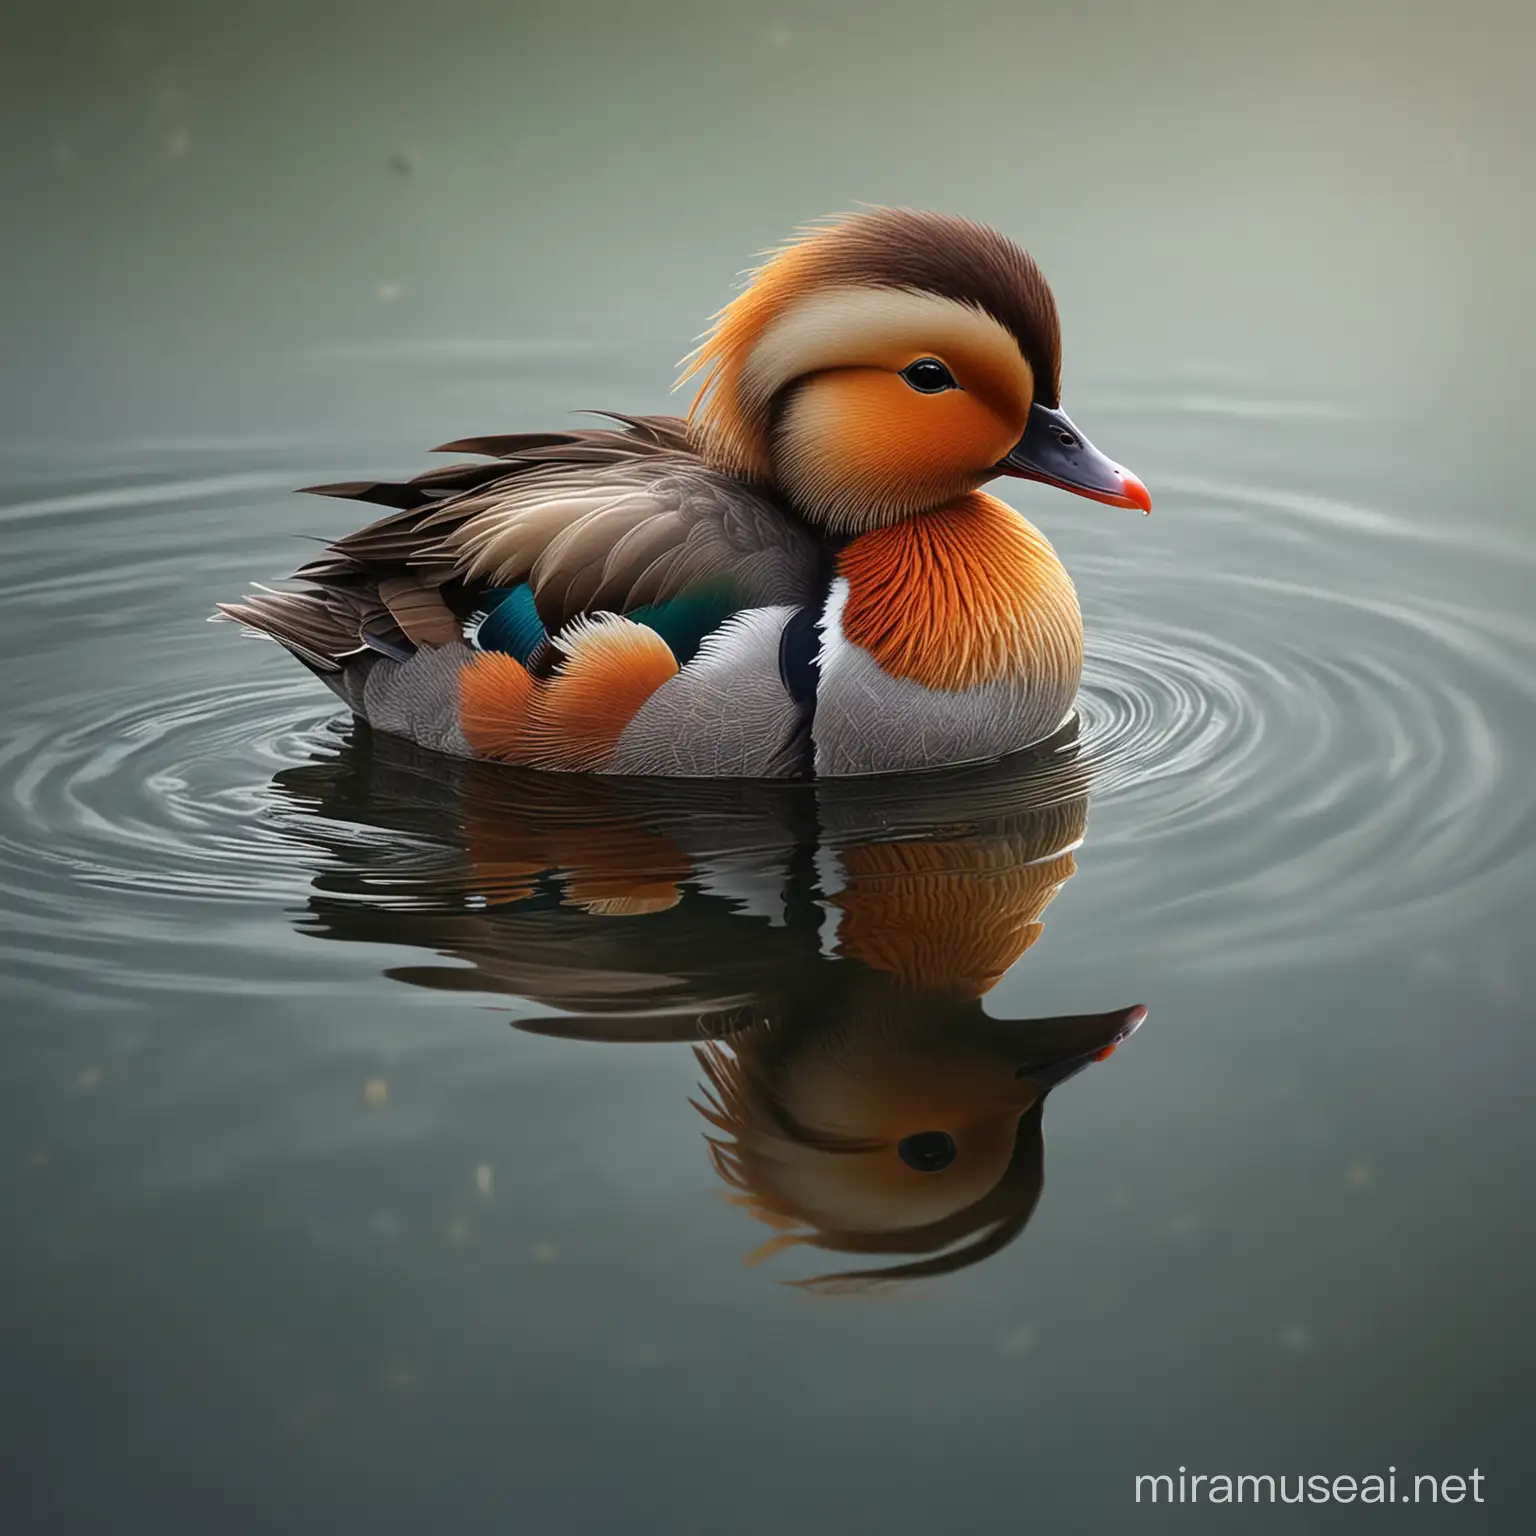 Created an ultra-photorealistic image that captures the essence of growth and potential. It portrays a mandarin duck chick looking into the water and seeing its reflection as an adult male mandarin duck in breeding plumage. This powerful visual metaphor represents one character at two different stages of life, all within a single reflection.